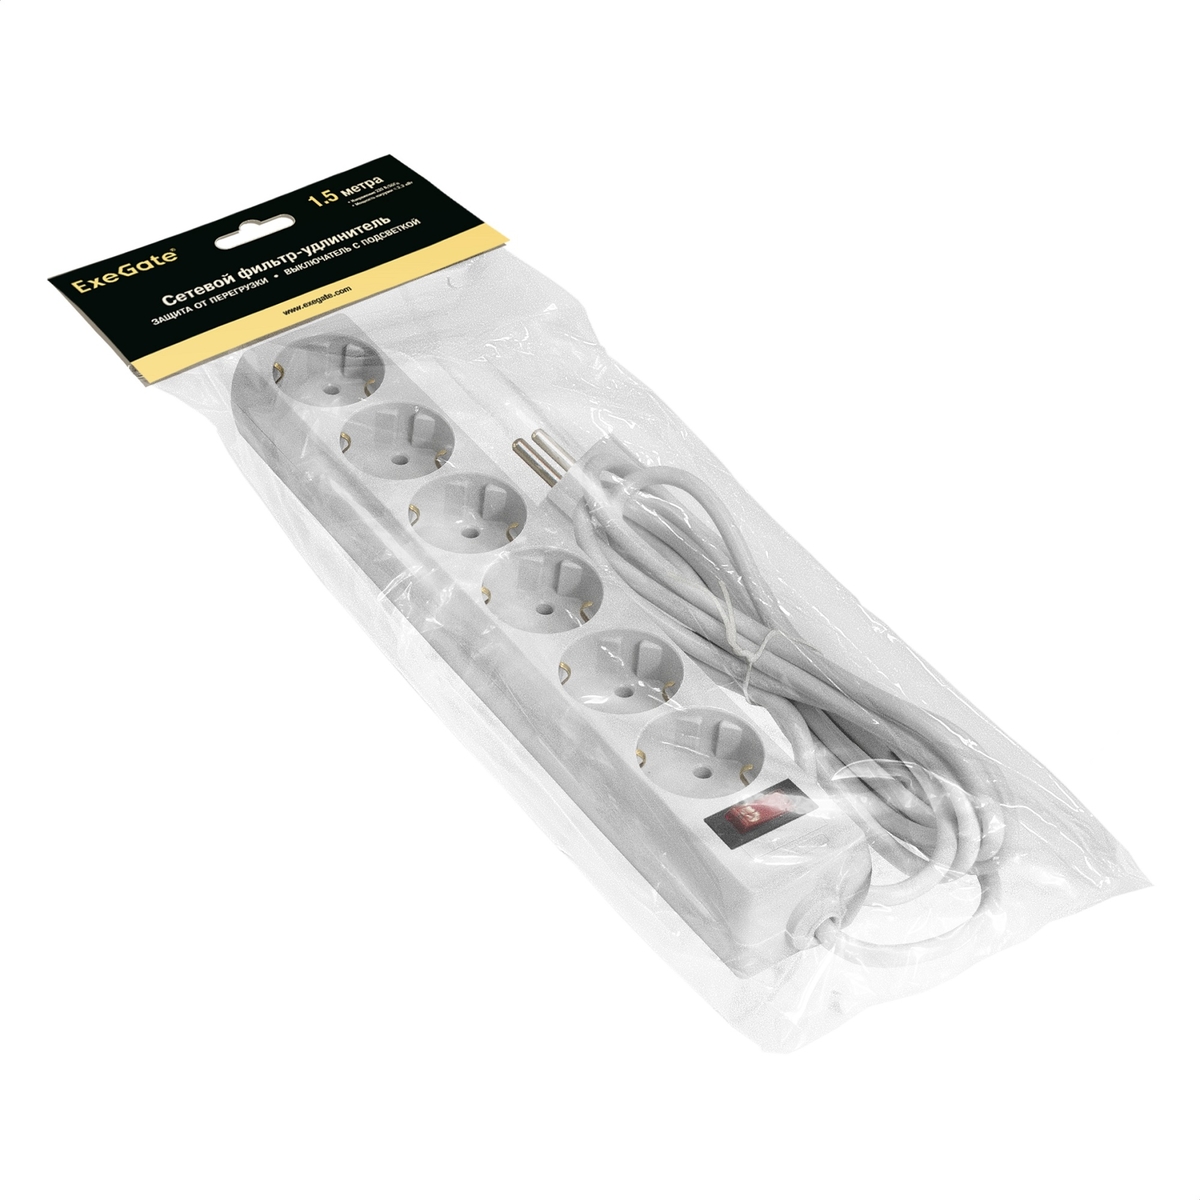 Surge protector ExeGate SP-6-1.5W